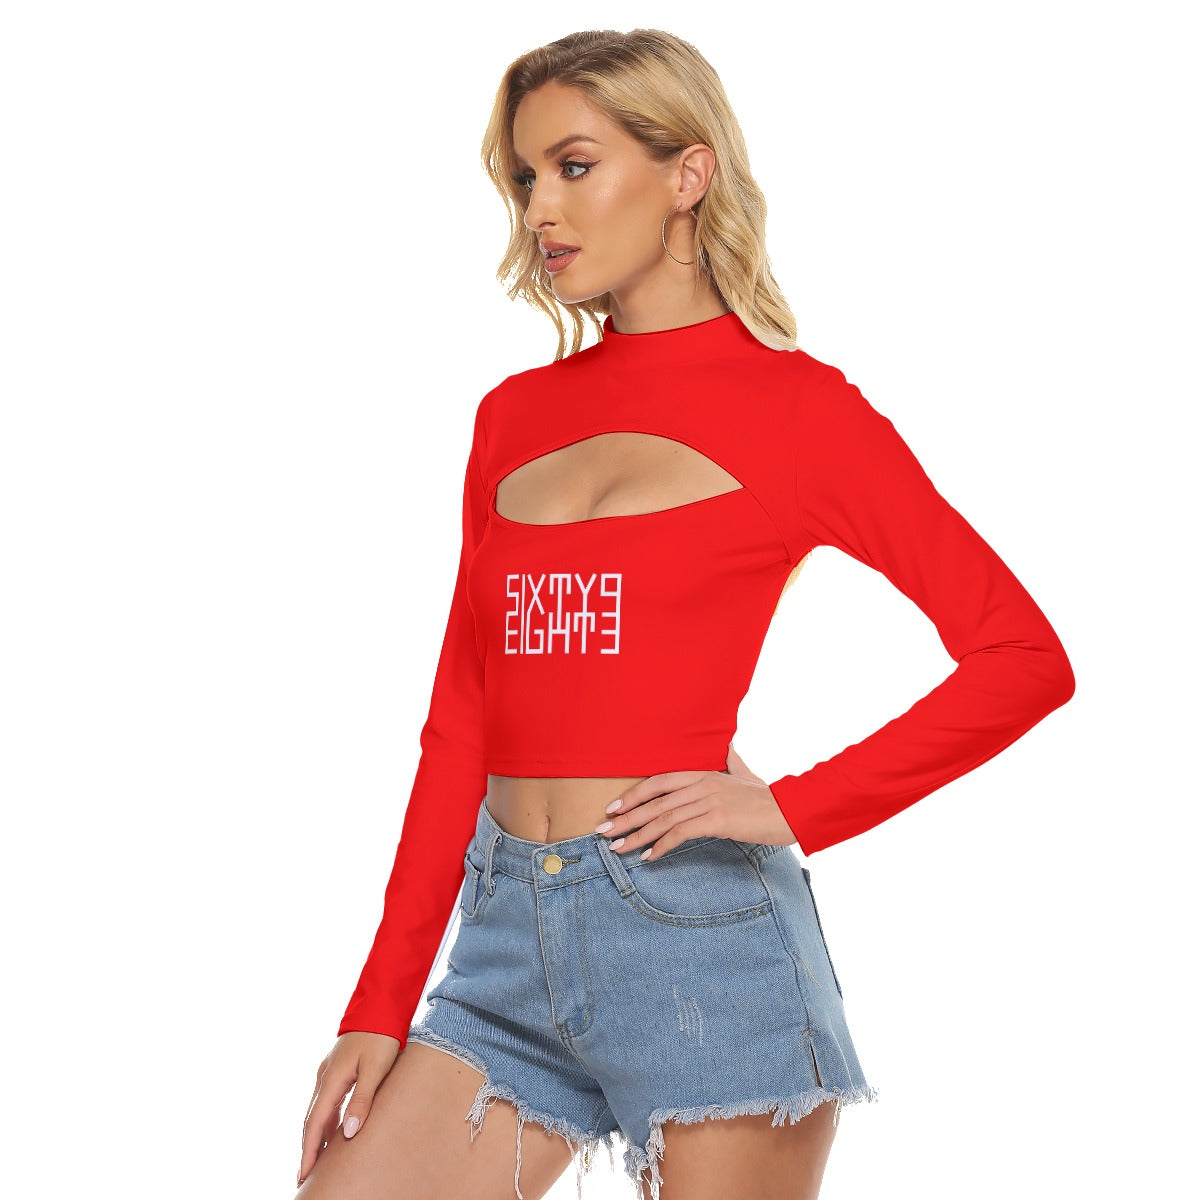 Sixty Eight 93 Logo White Red Women's Hollow Chest Keyhole Tight Crop Top